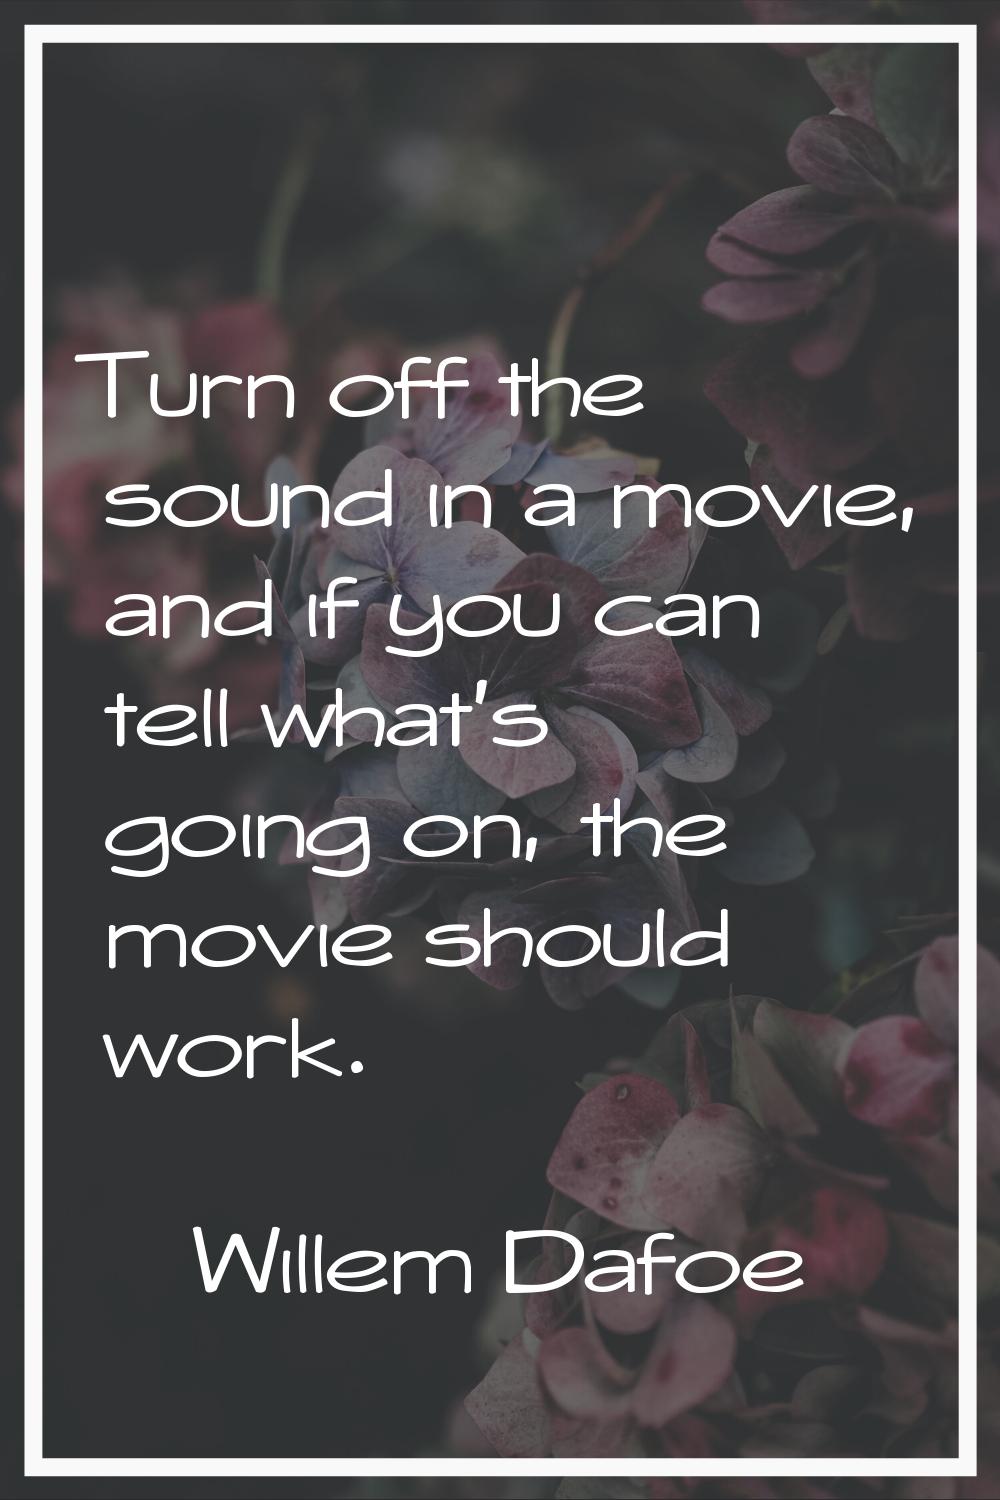 Turn off the sound in a movie, and if you can tell what's going on, the movie should work.